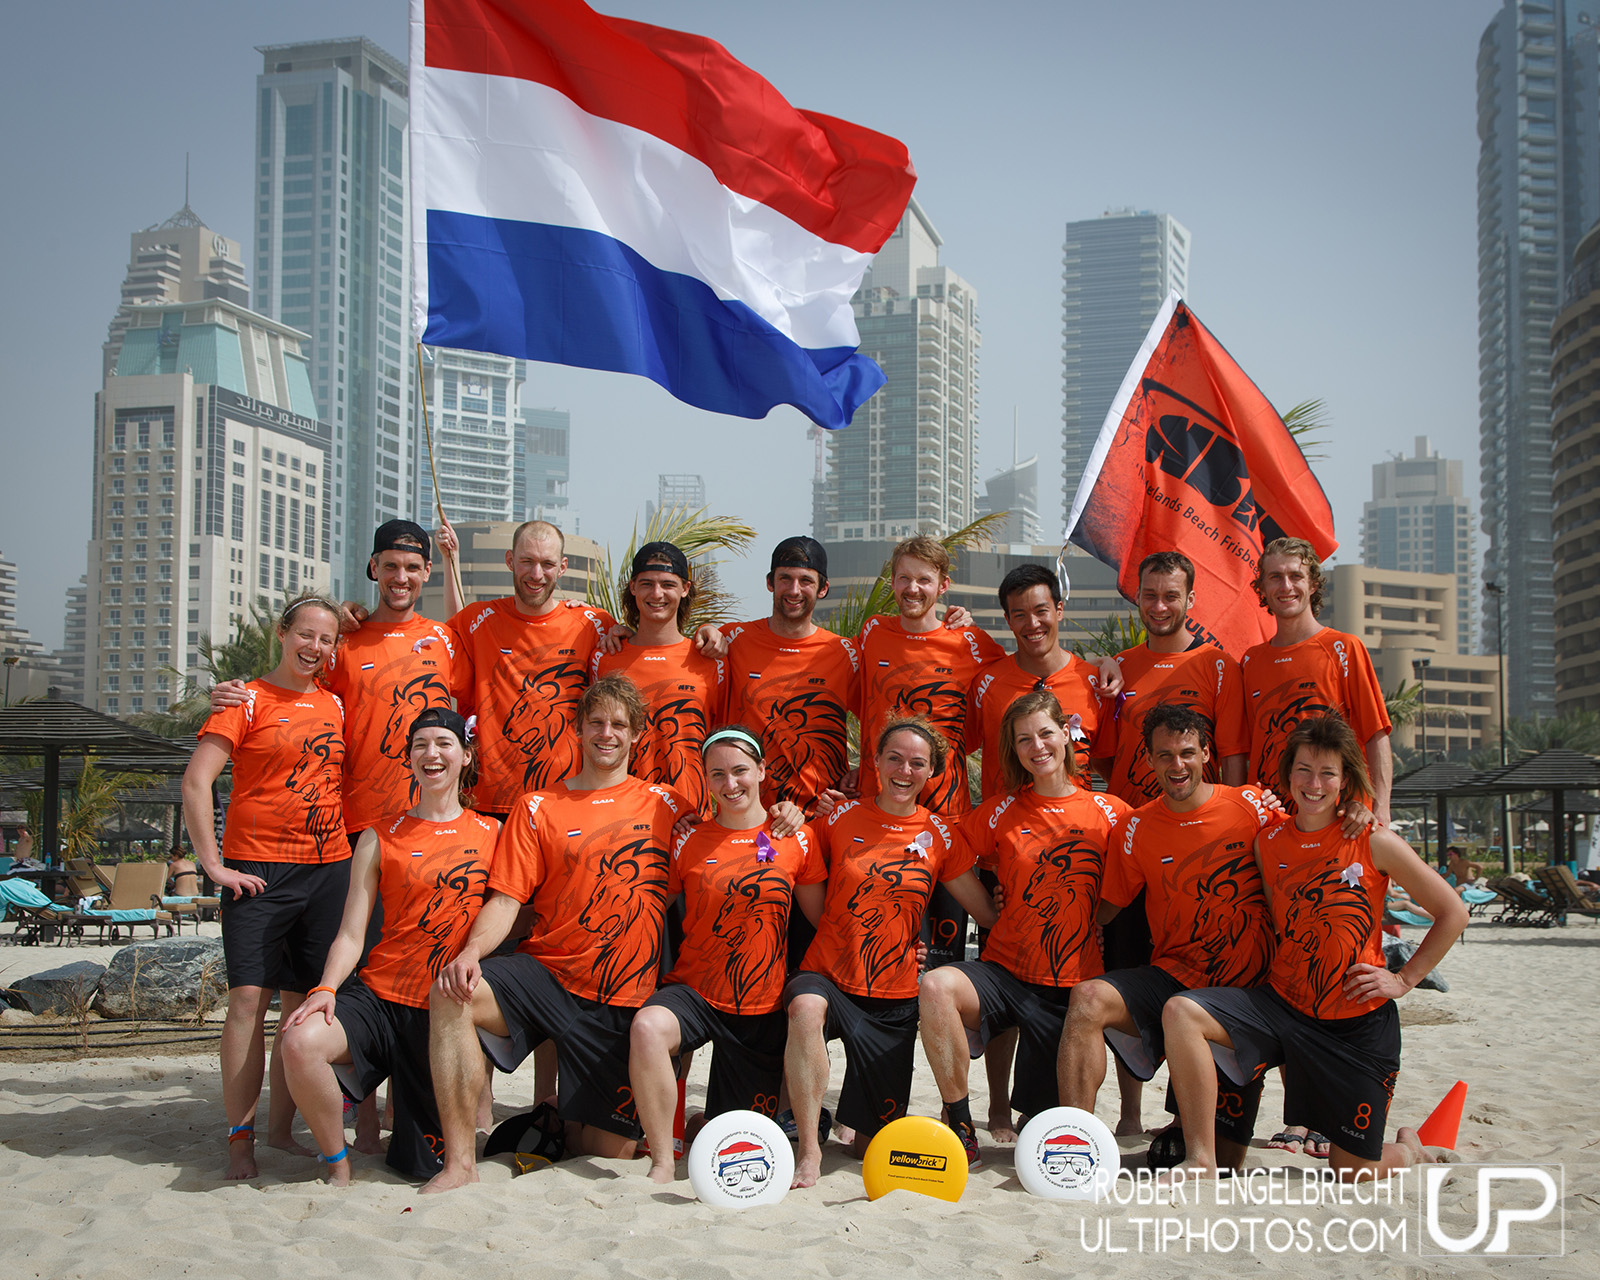 Team picture of Netherlands Mixed